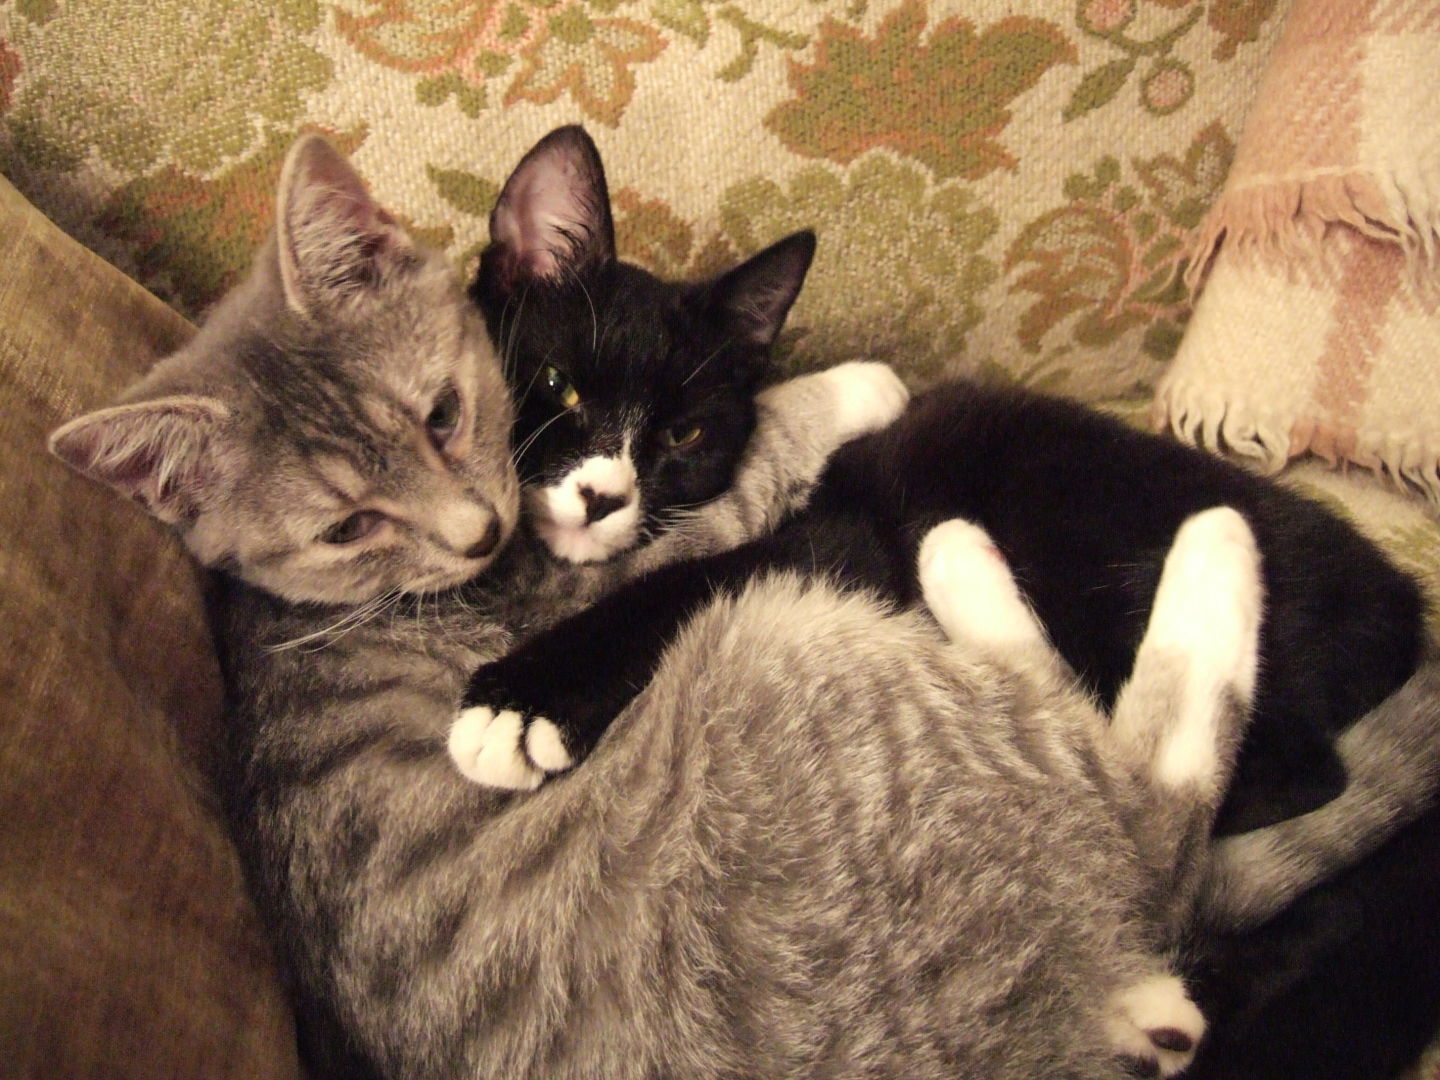 Friends forever! Science reporter Amy Standen's cats are besties.  Chris Colin/KQED